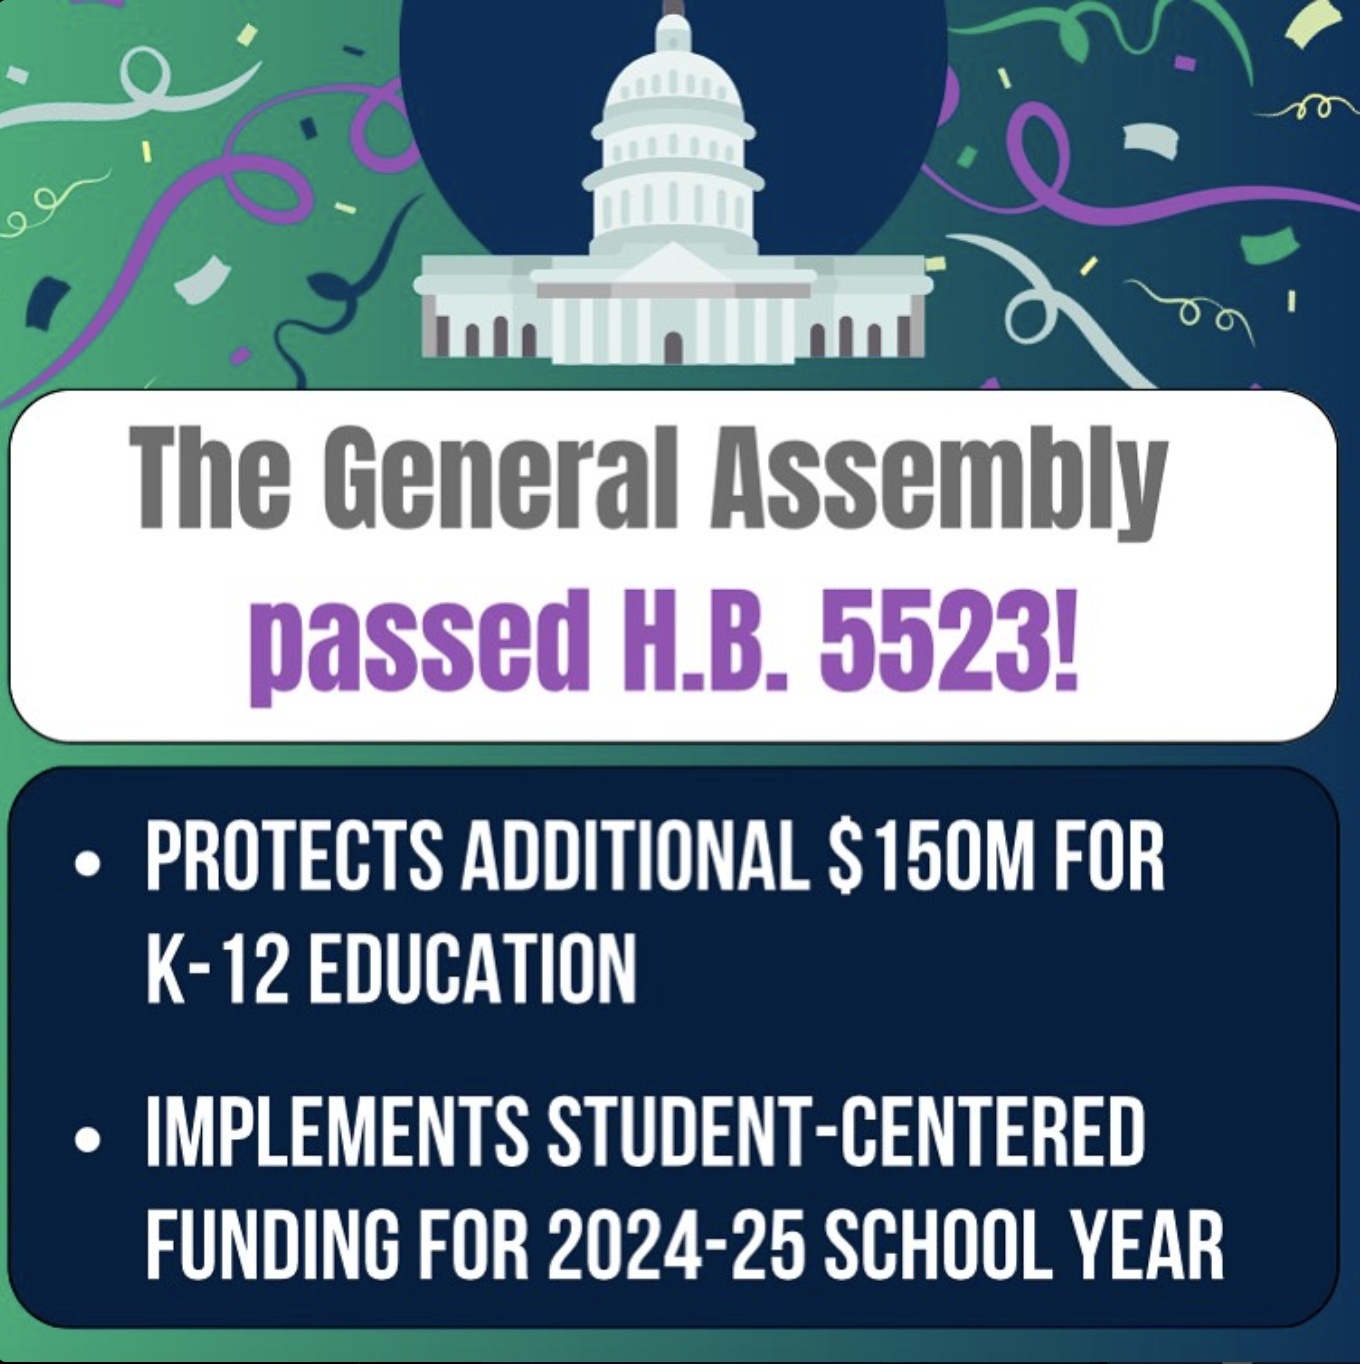 Graphic celebrating the passage of HB 5523.